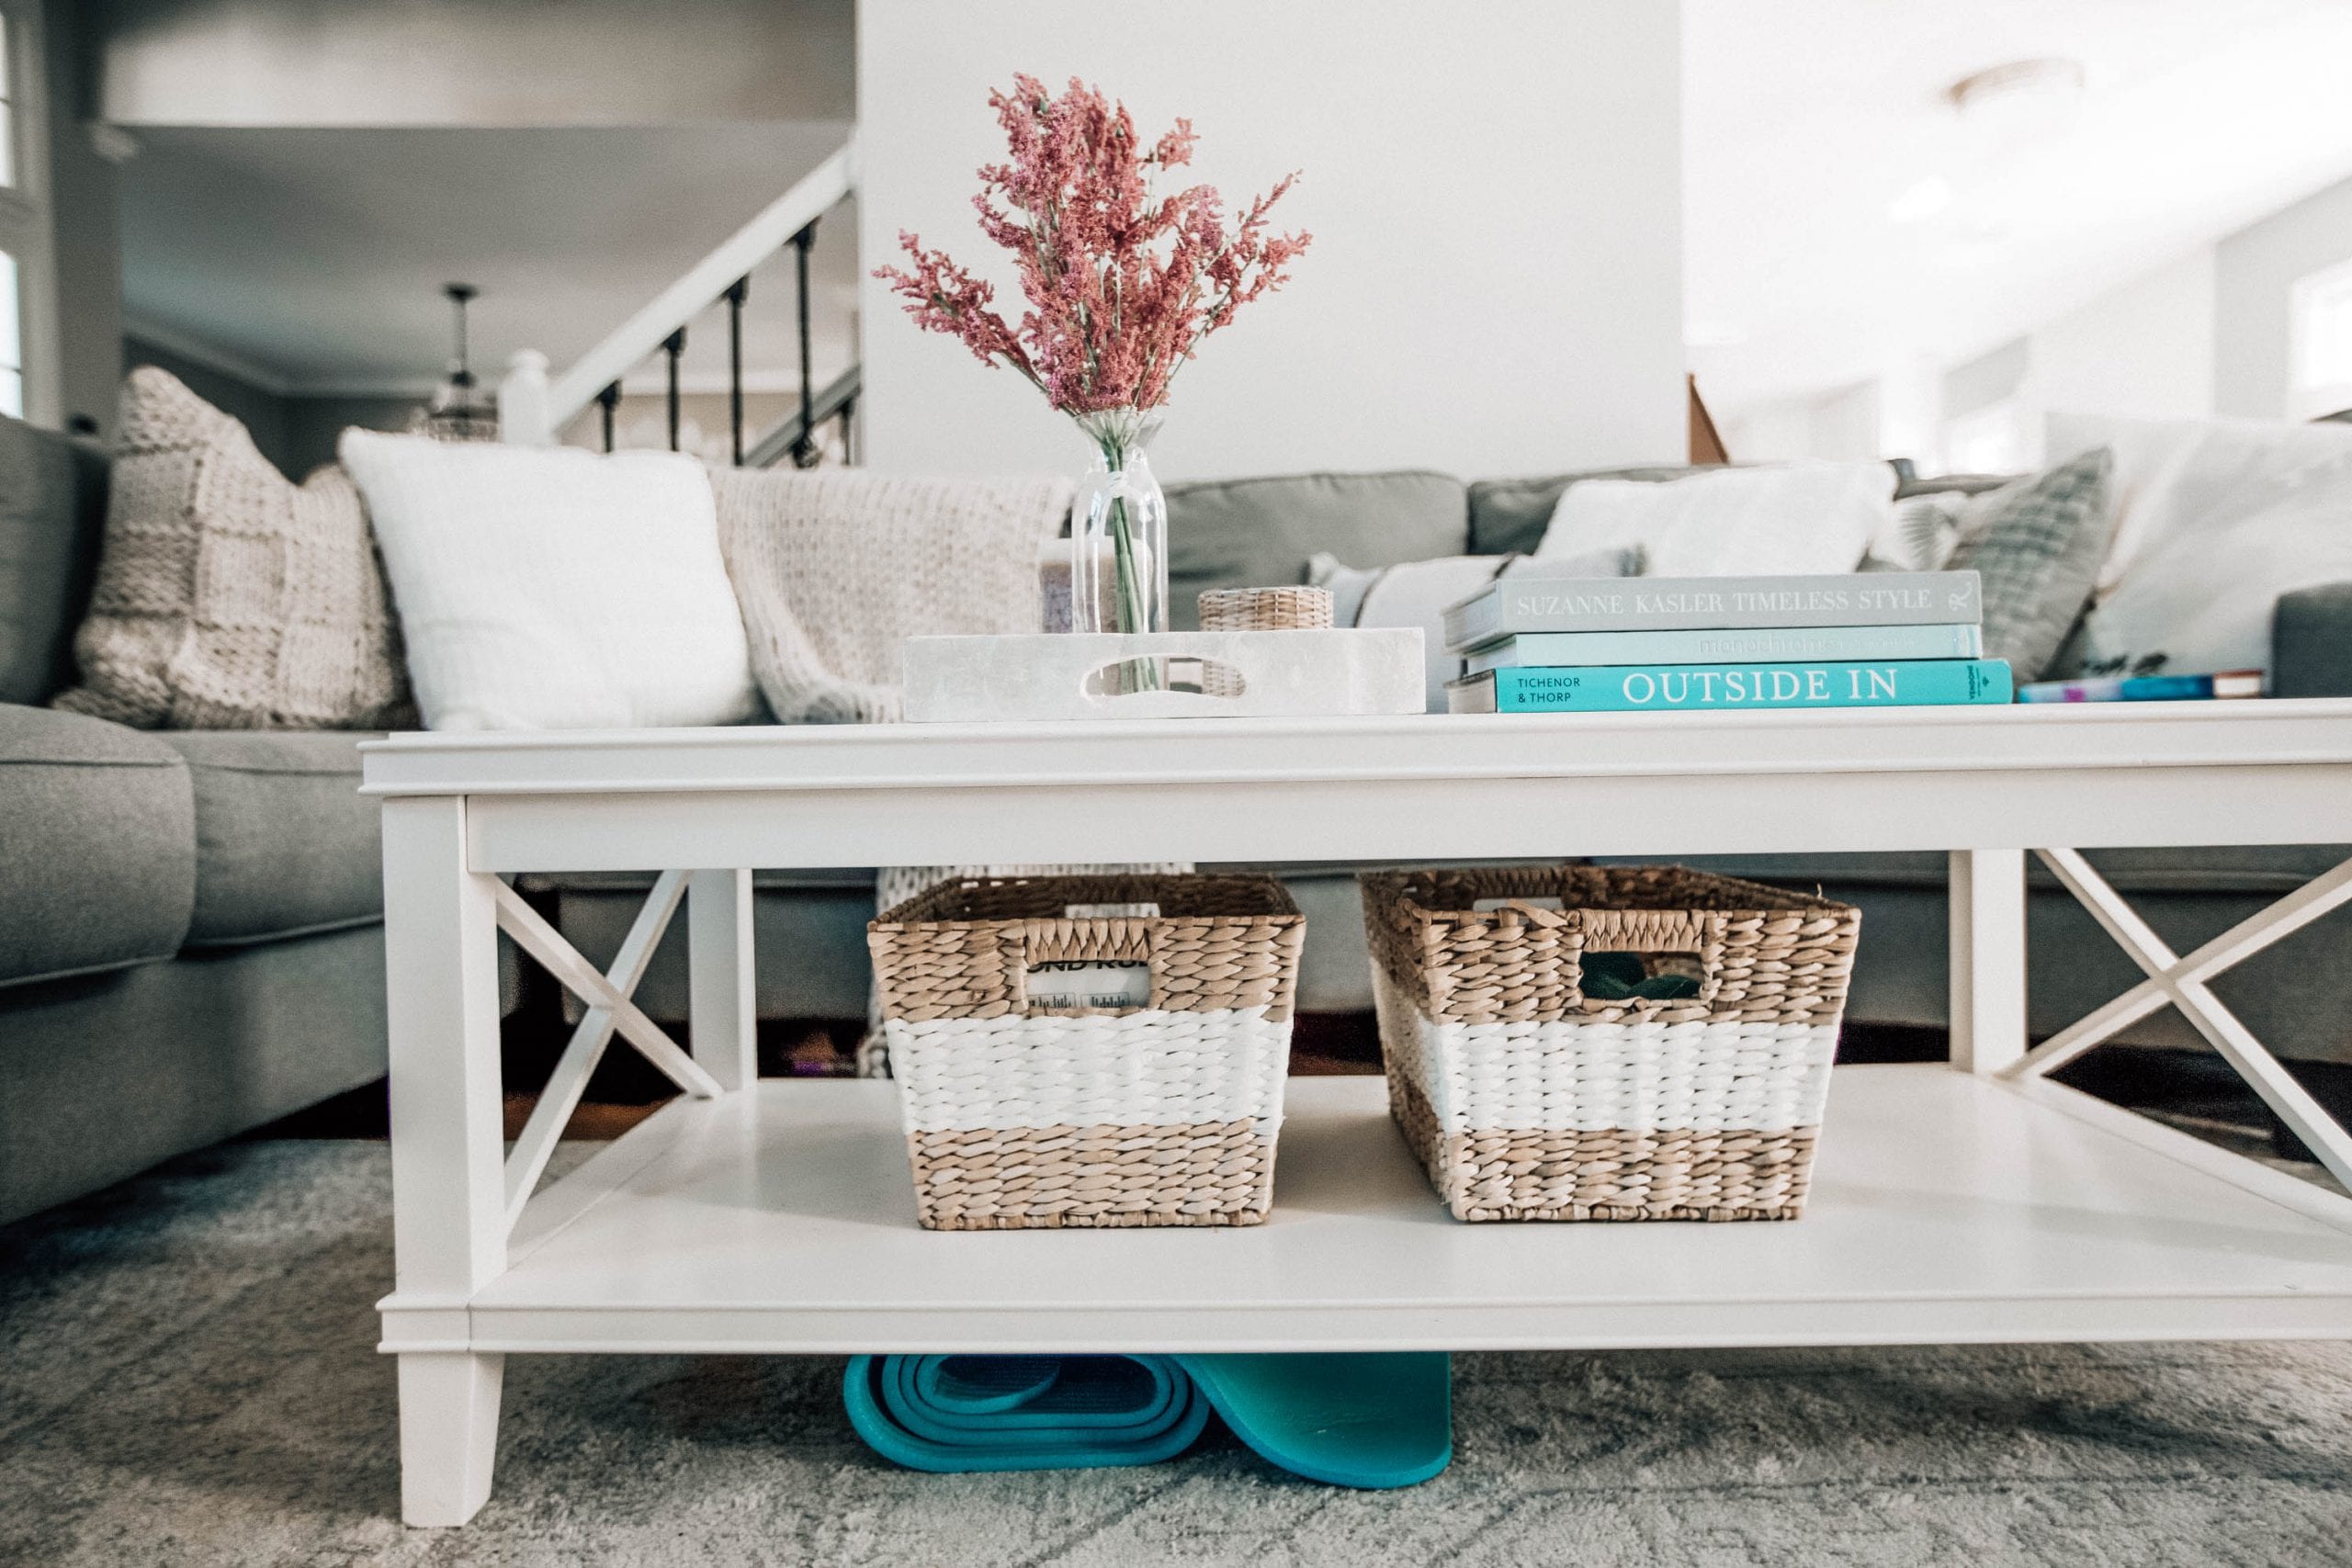 Ways to Organize Your Home with Baskets